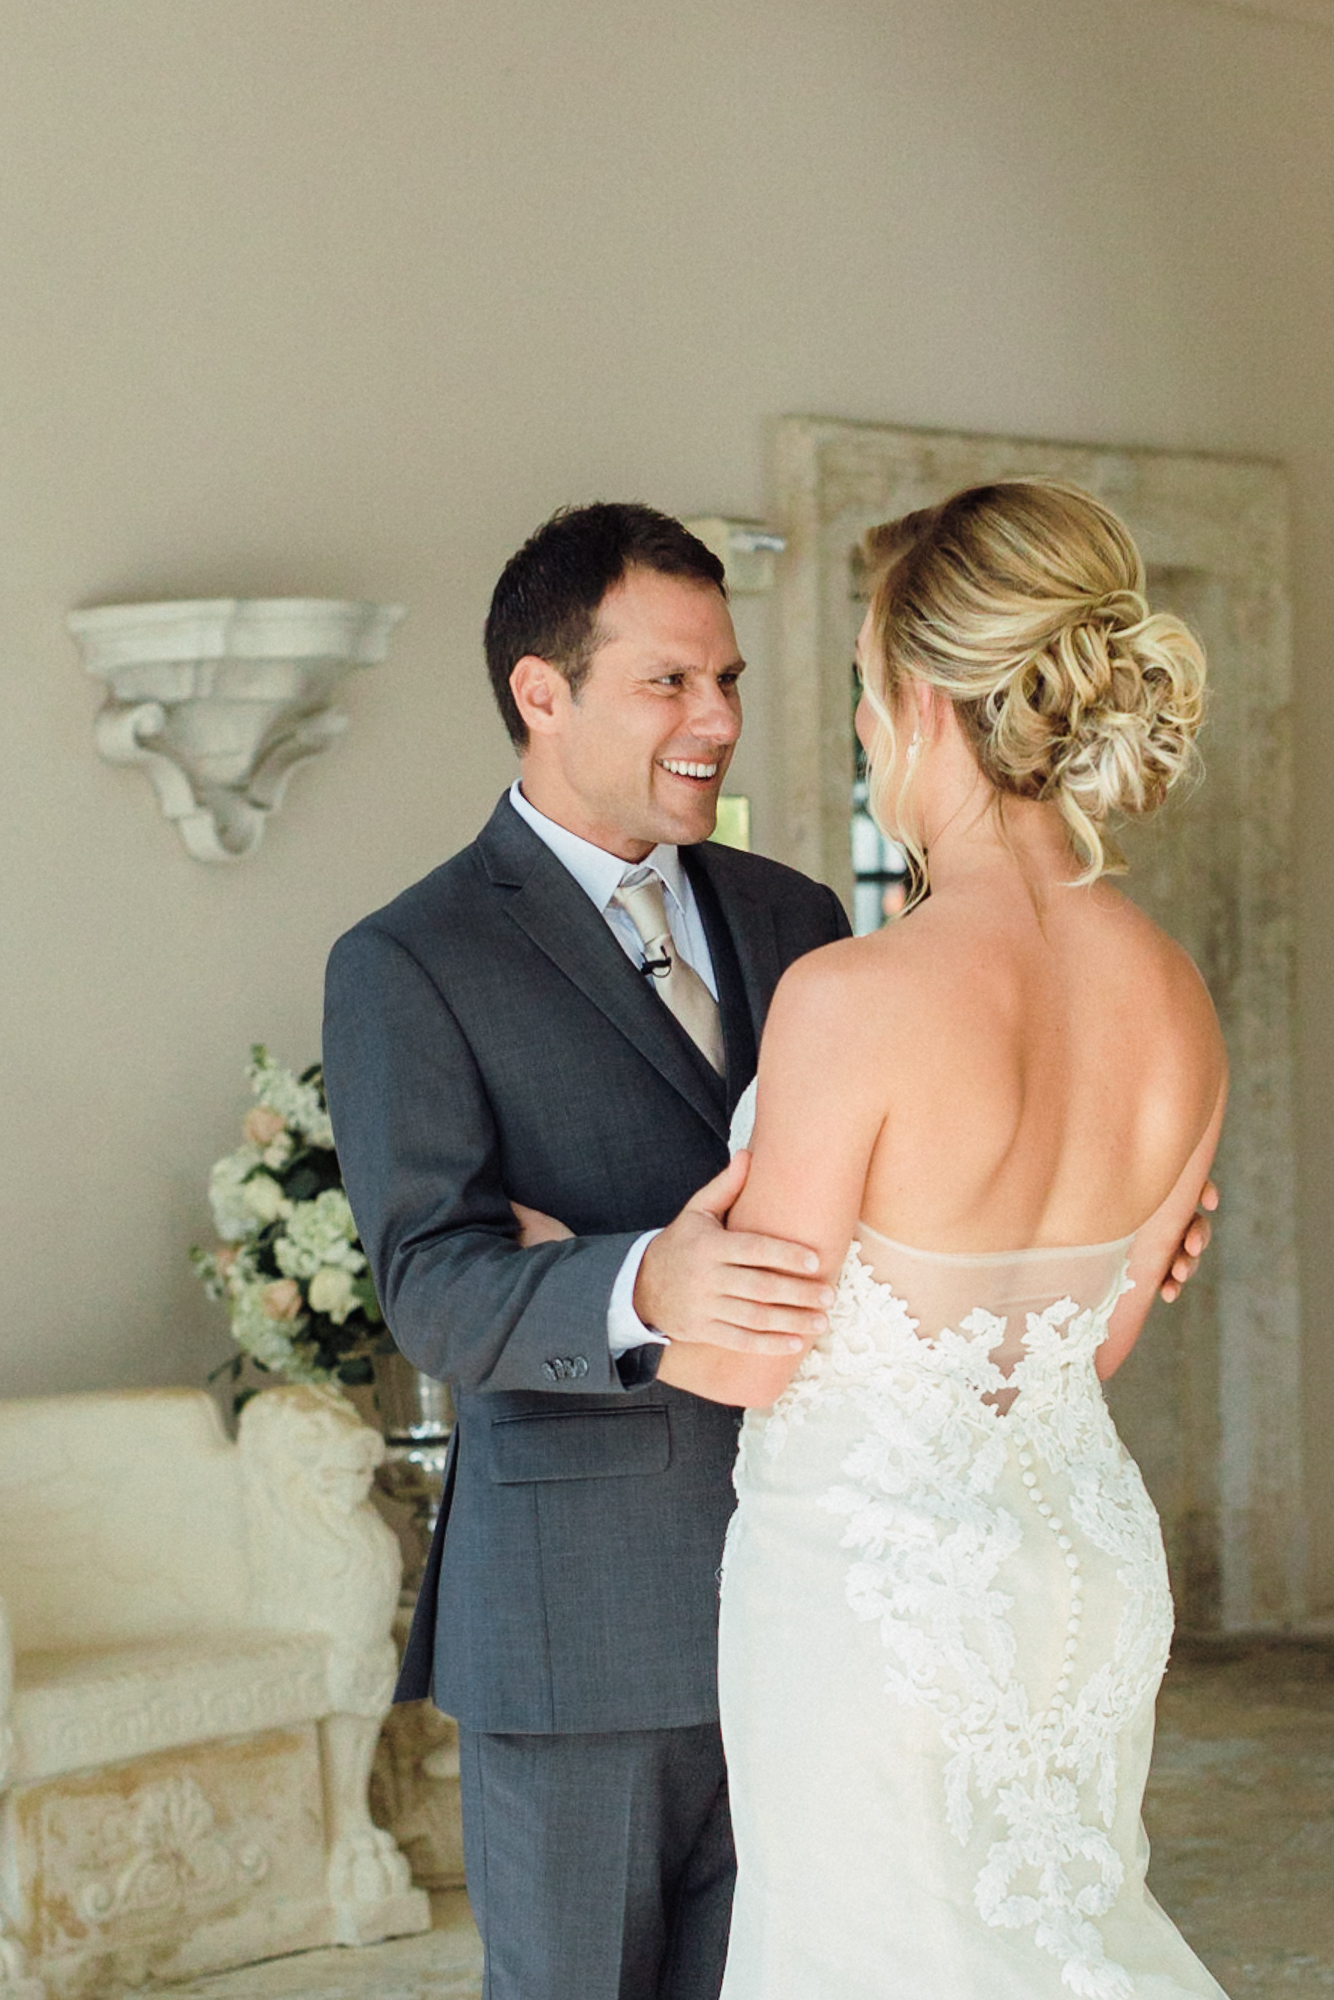 This groom's reaction to seeing his bride for the first time that day!